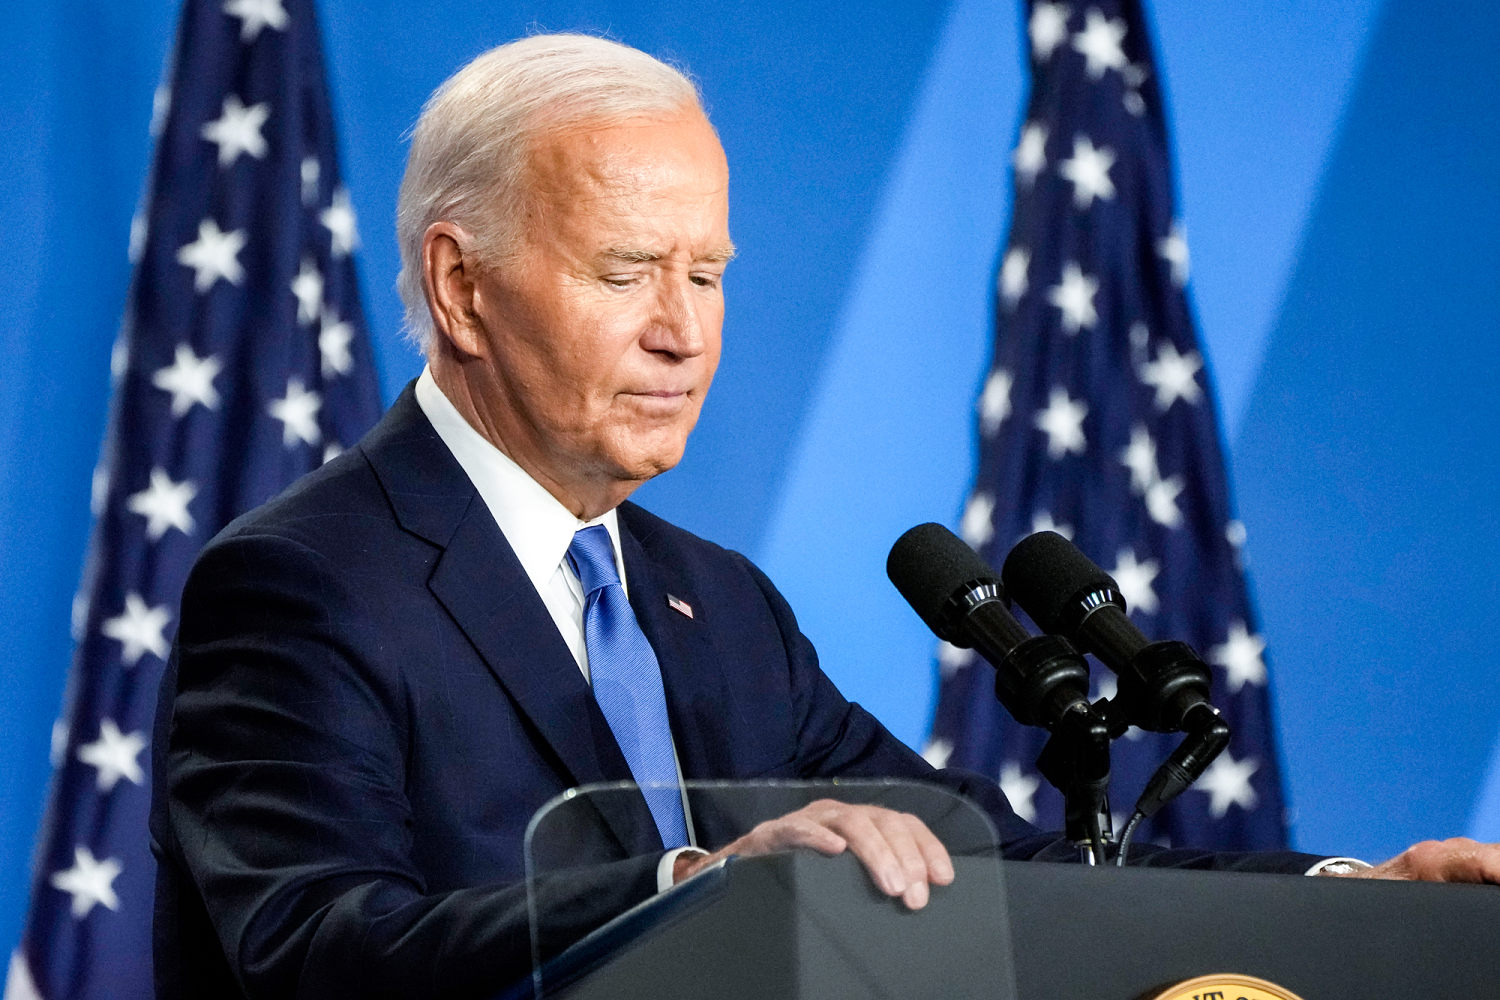 The case against Biden's candidacy remains as strong as ever